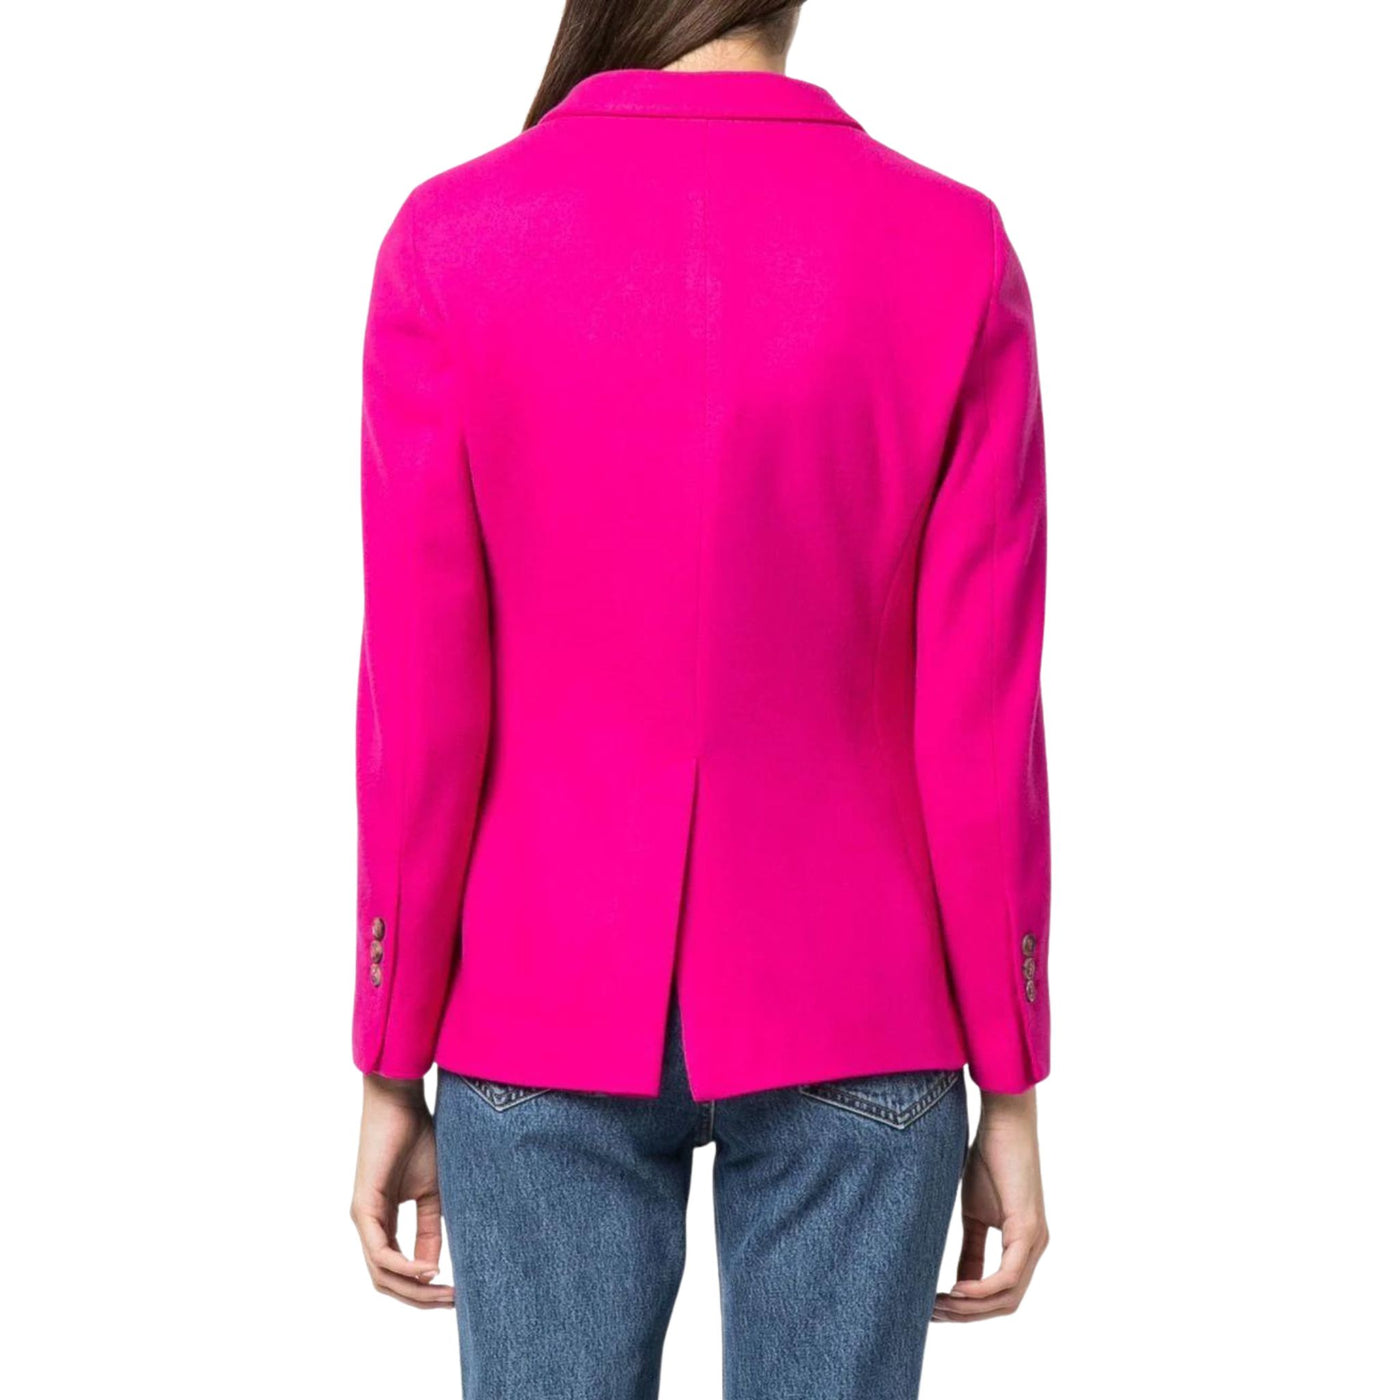 Women's double-breasted jacket